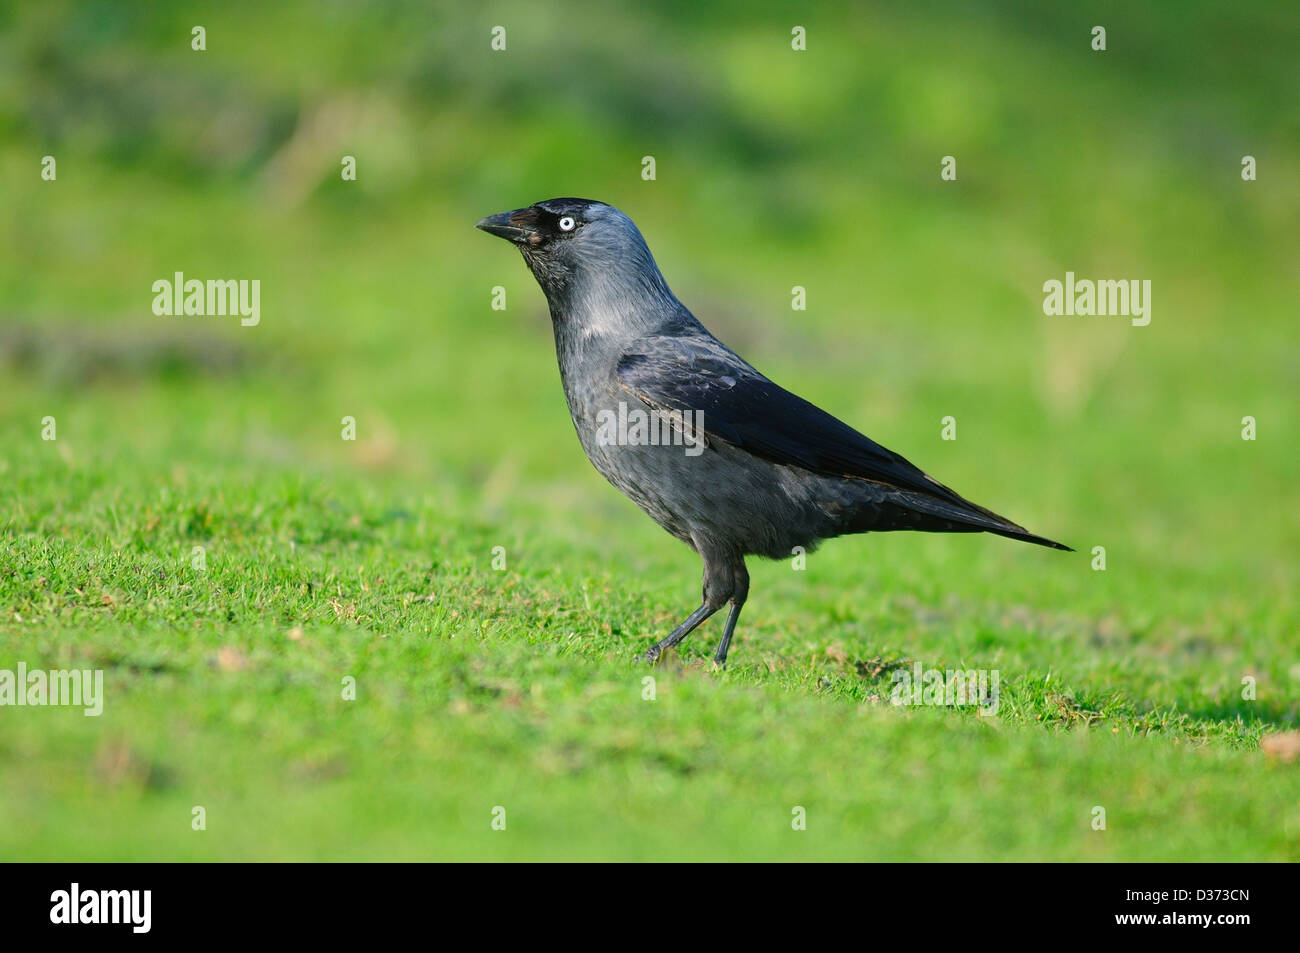 A jackdaw on the grass Stock Photo